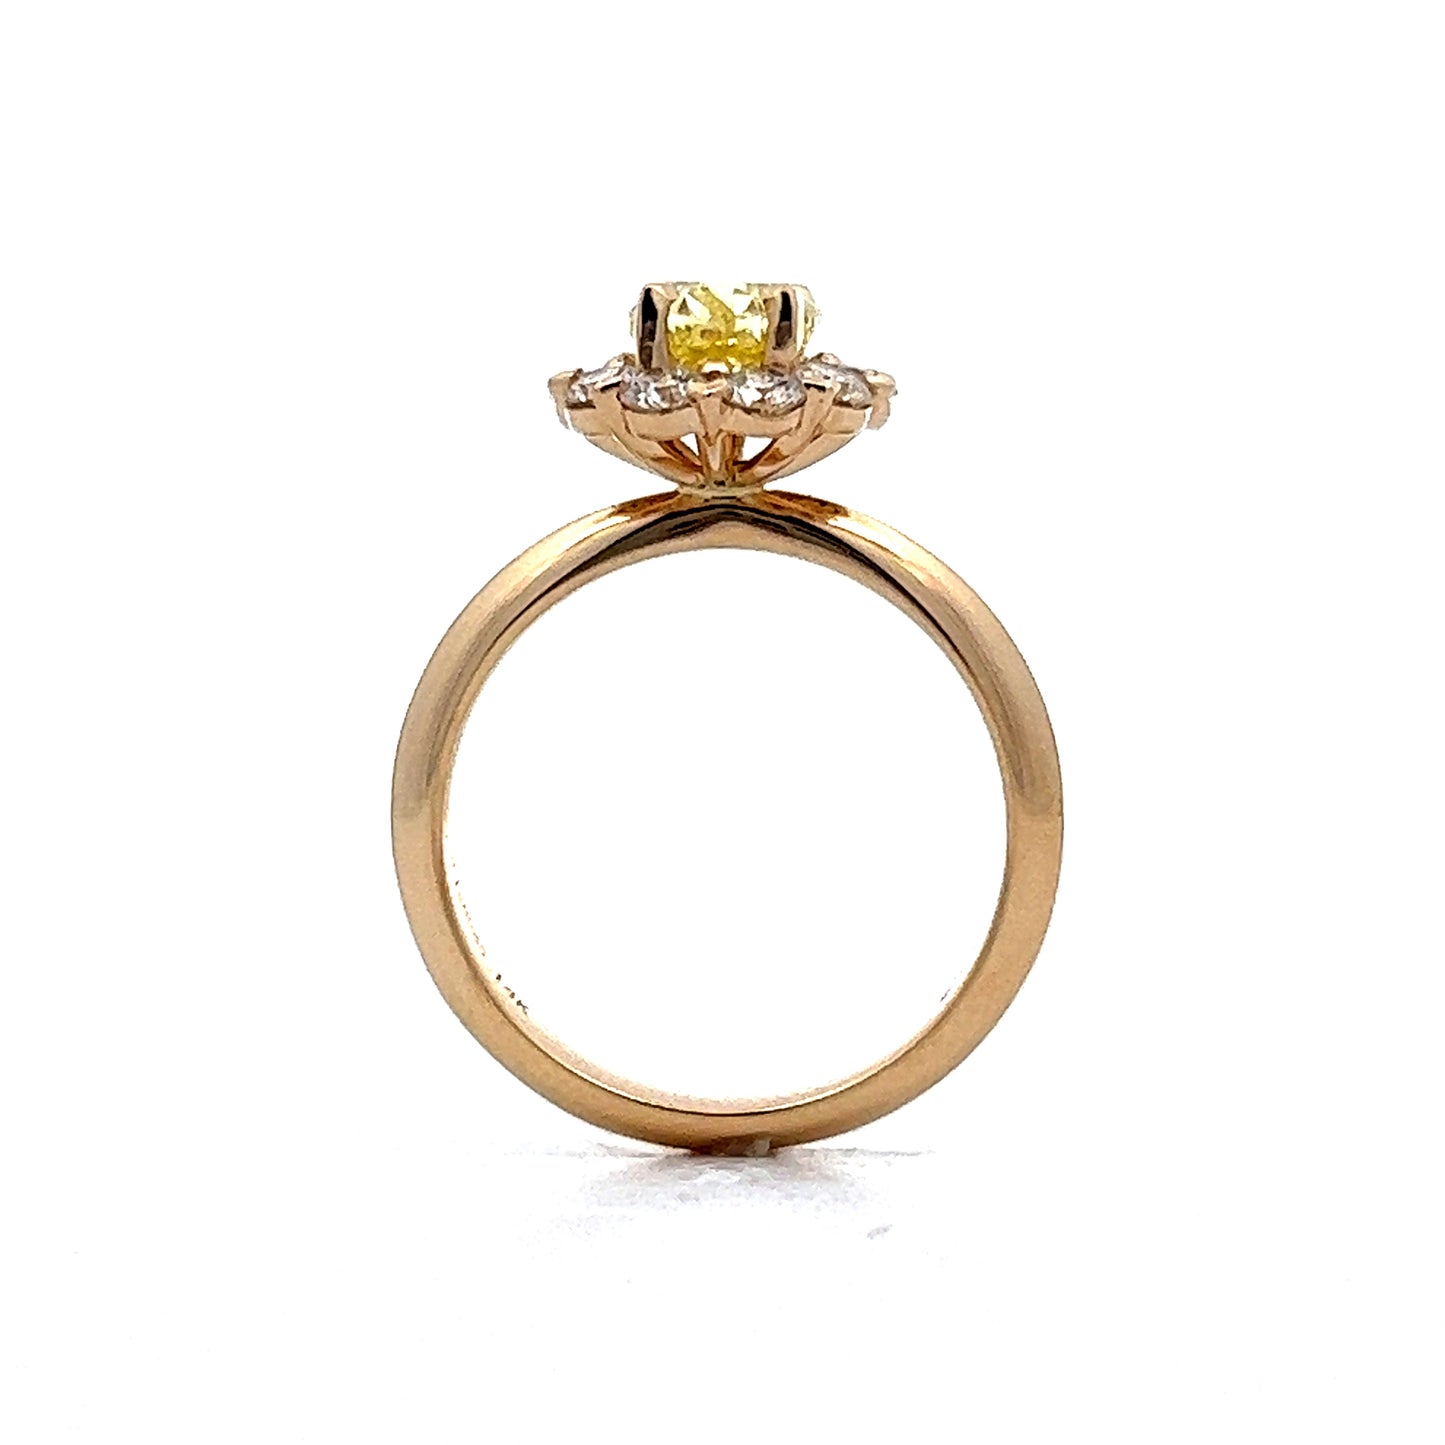 1.39 Fancy Yellow Diamond Engagement Ring in 14k Yellow Gold